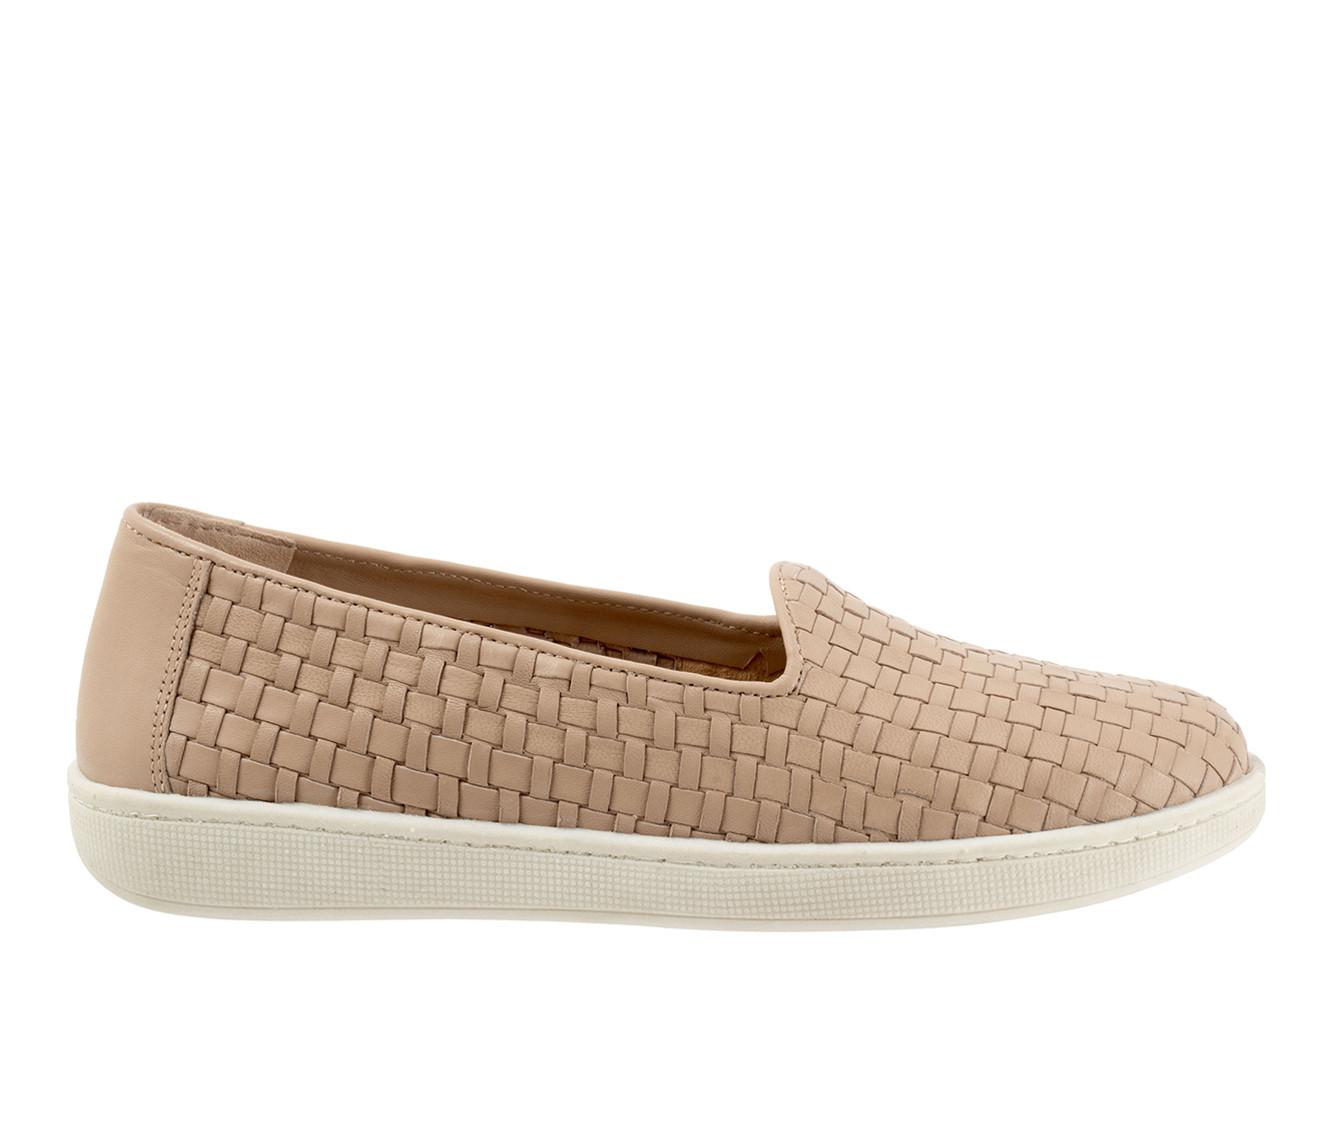 Women's Trotters Adelina Slip On Shoes